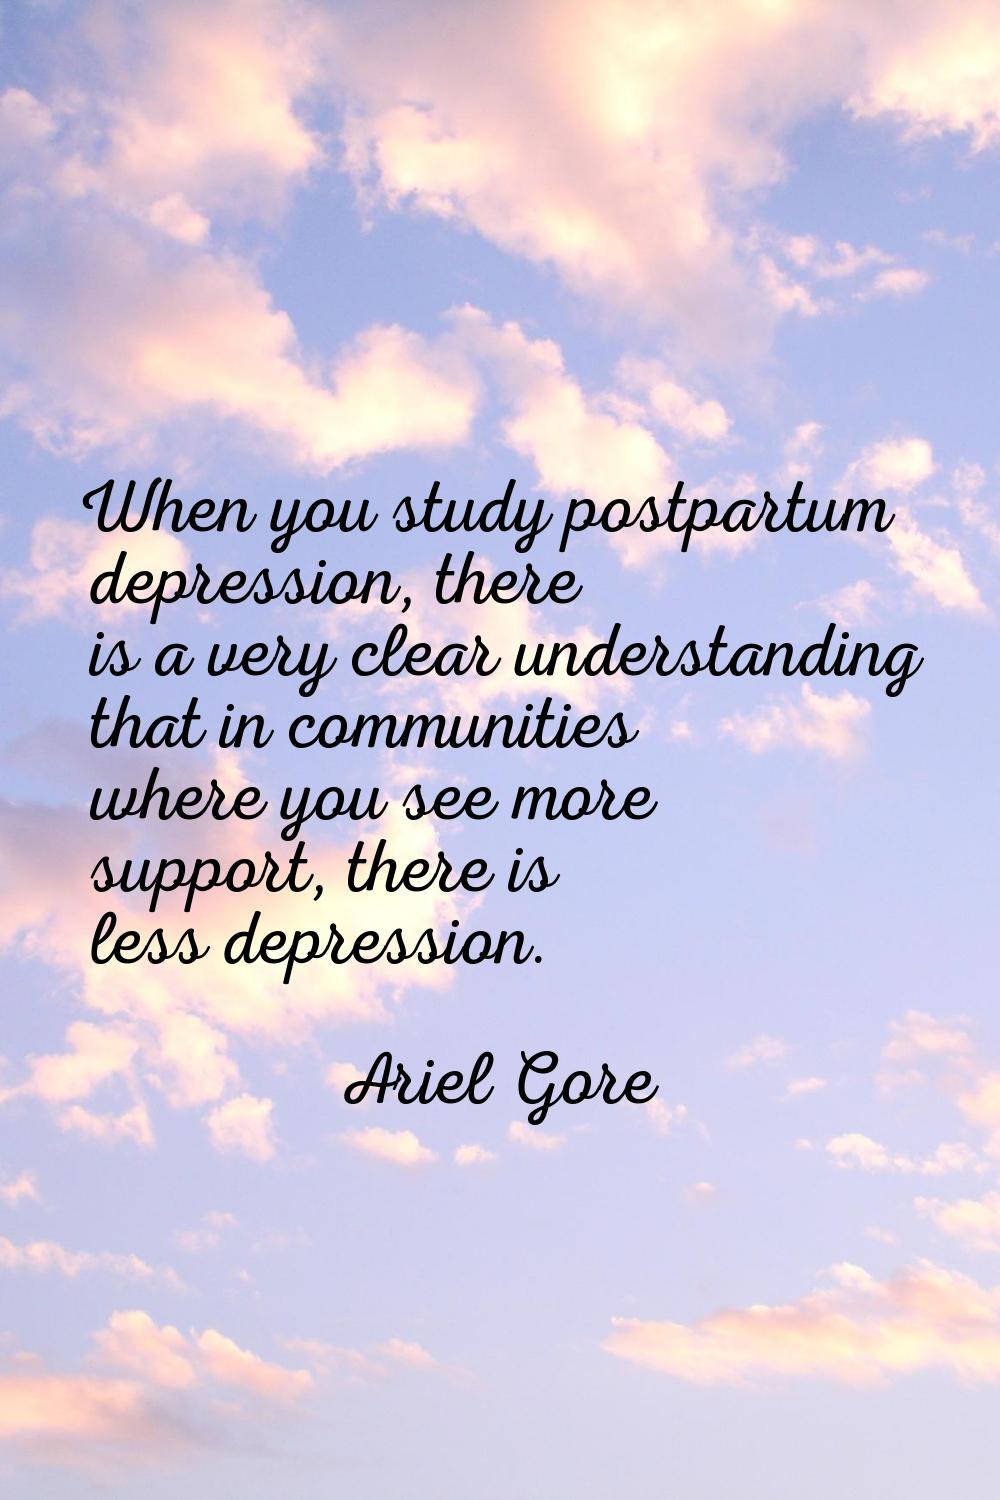 When you study postpartum depression, there is a very clear understanding that in communities where